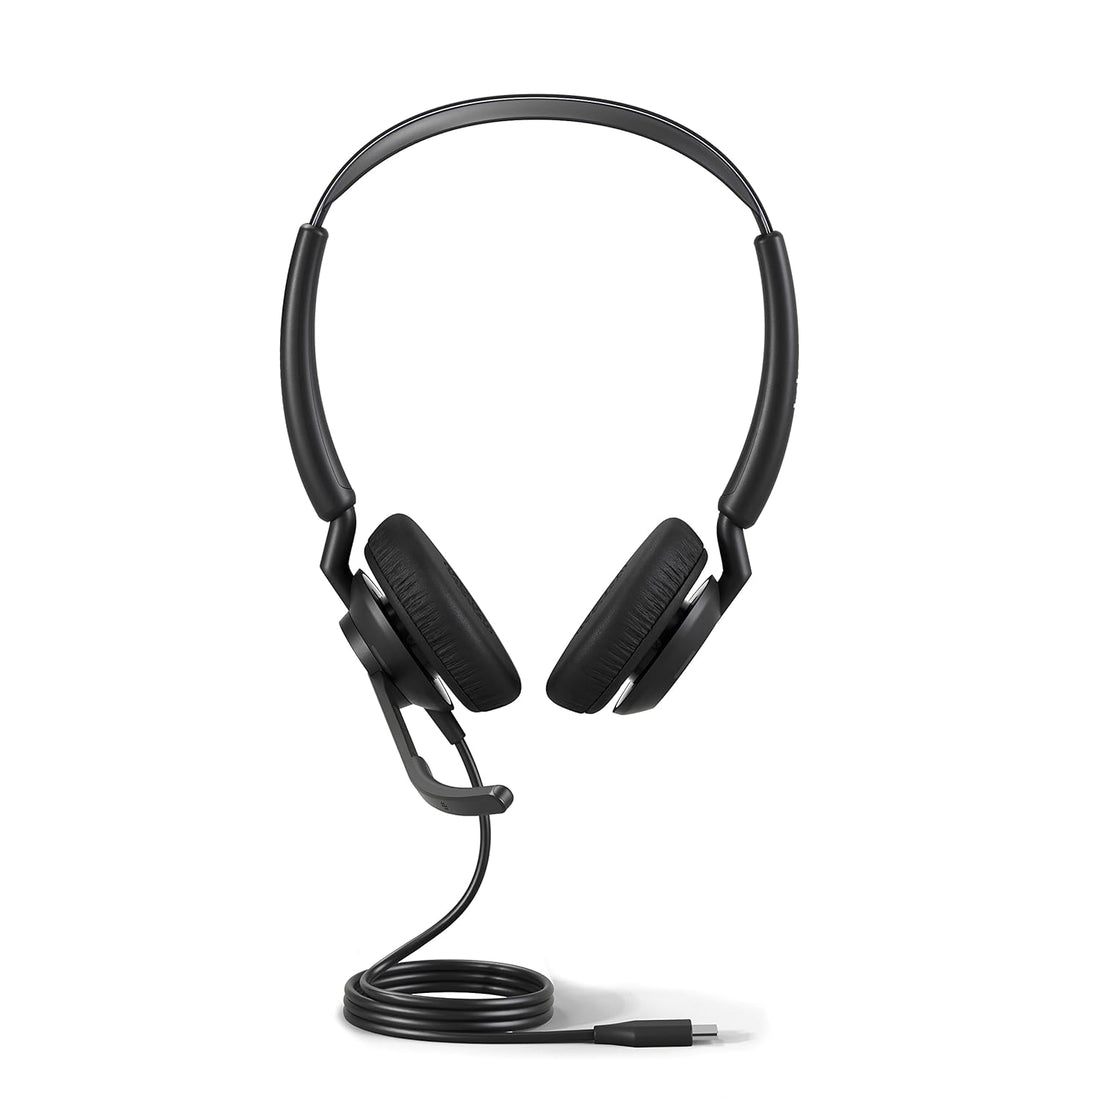 Jabra Engage 50 II Wired Stereo Headset with Link Call Control - Noise-Cancelling 3-Mic Technology and USB-C Cable, Ultra-Lightweight - MS Teams Certified, Works with All Other Platforms - Black